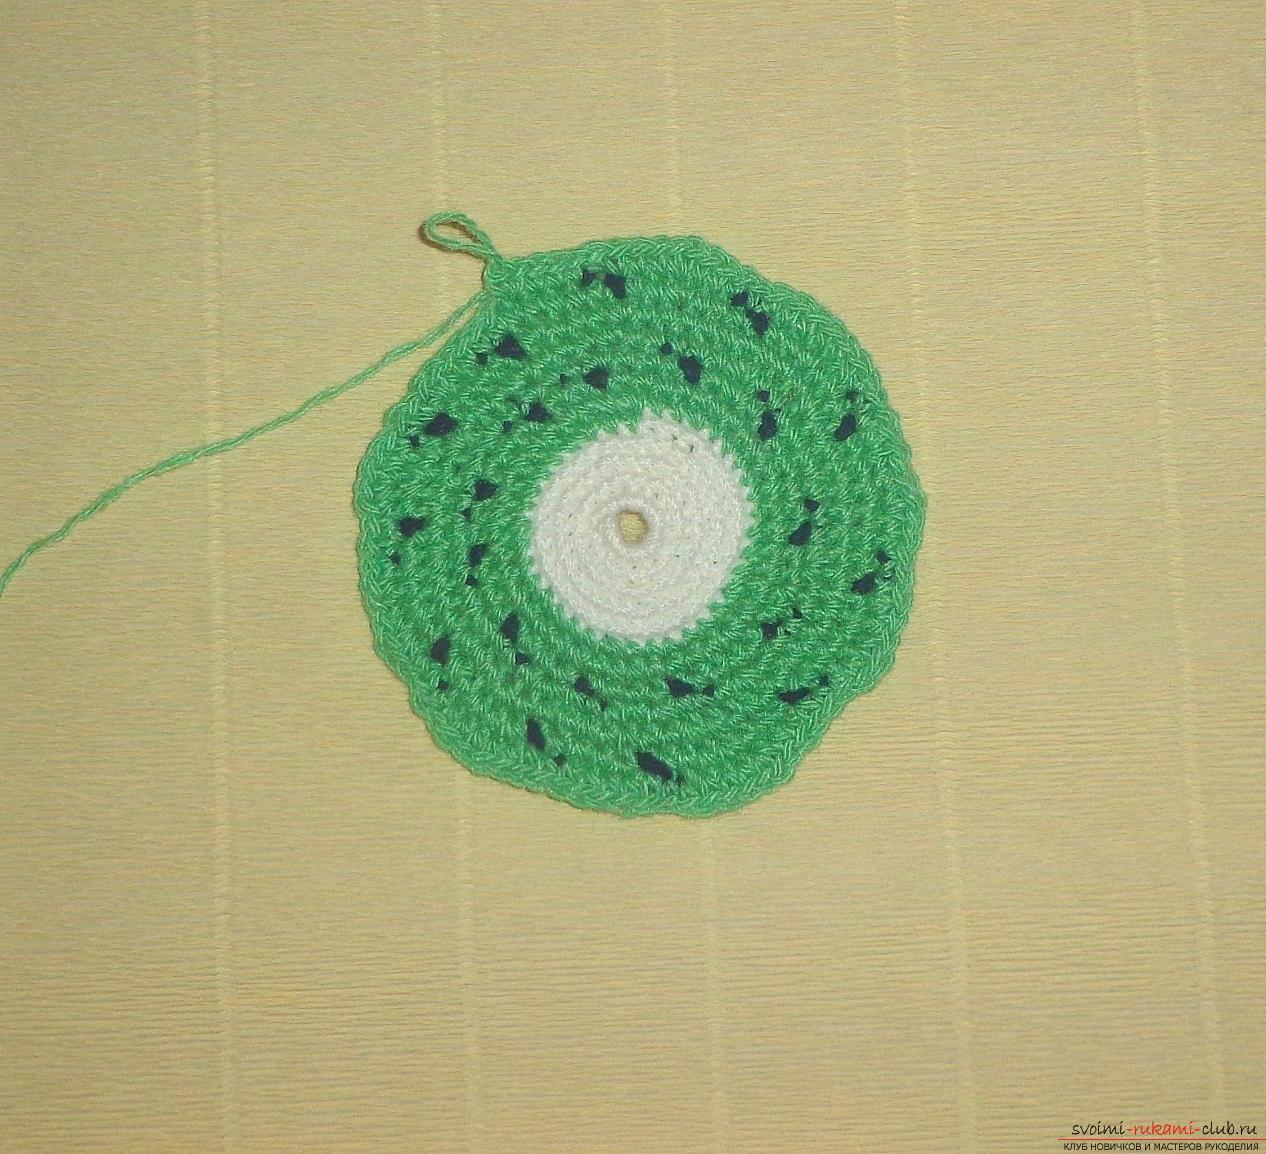 Crochet crochet lesson for hot Kiwi with a description of steps and photos. Photo №4